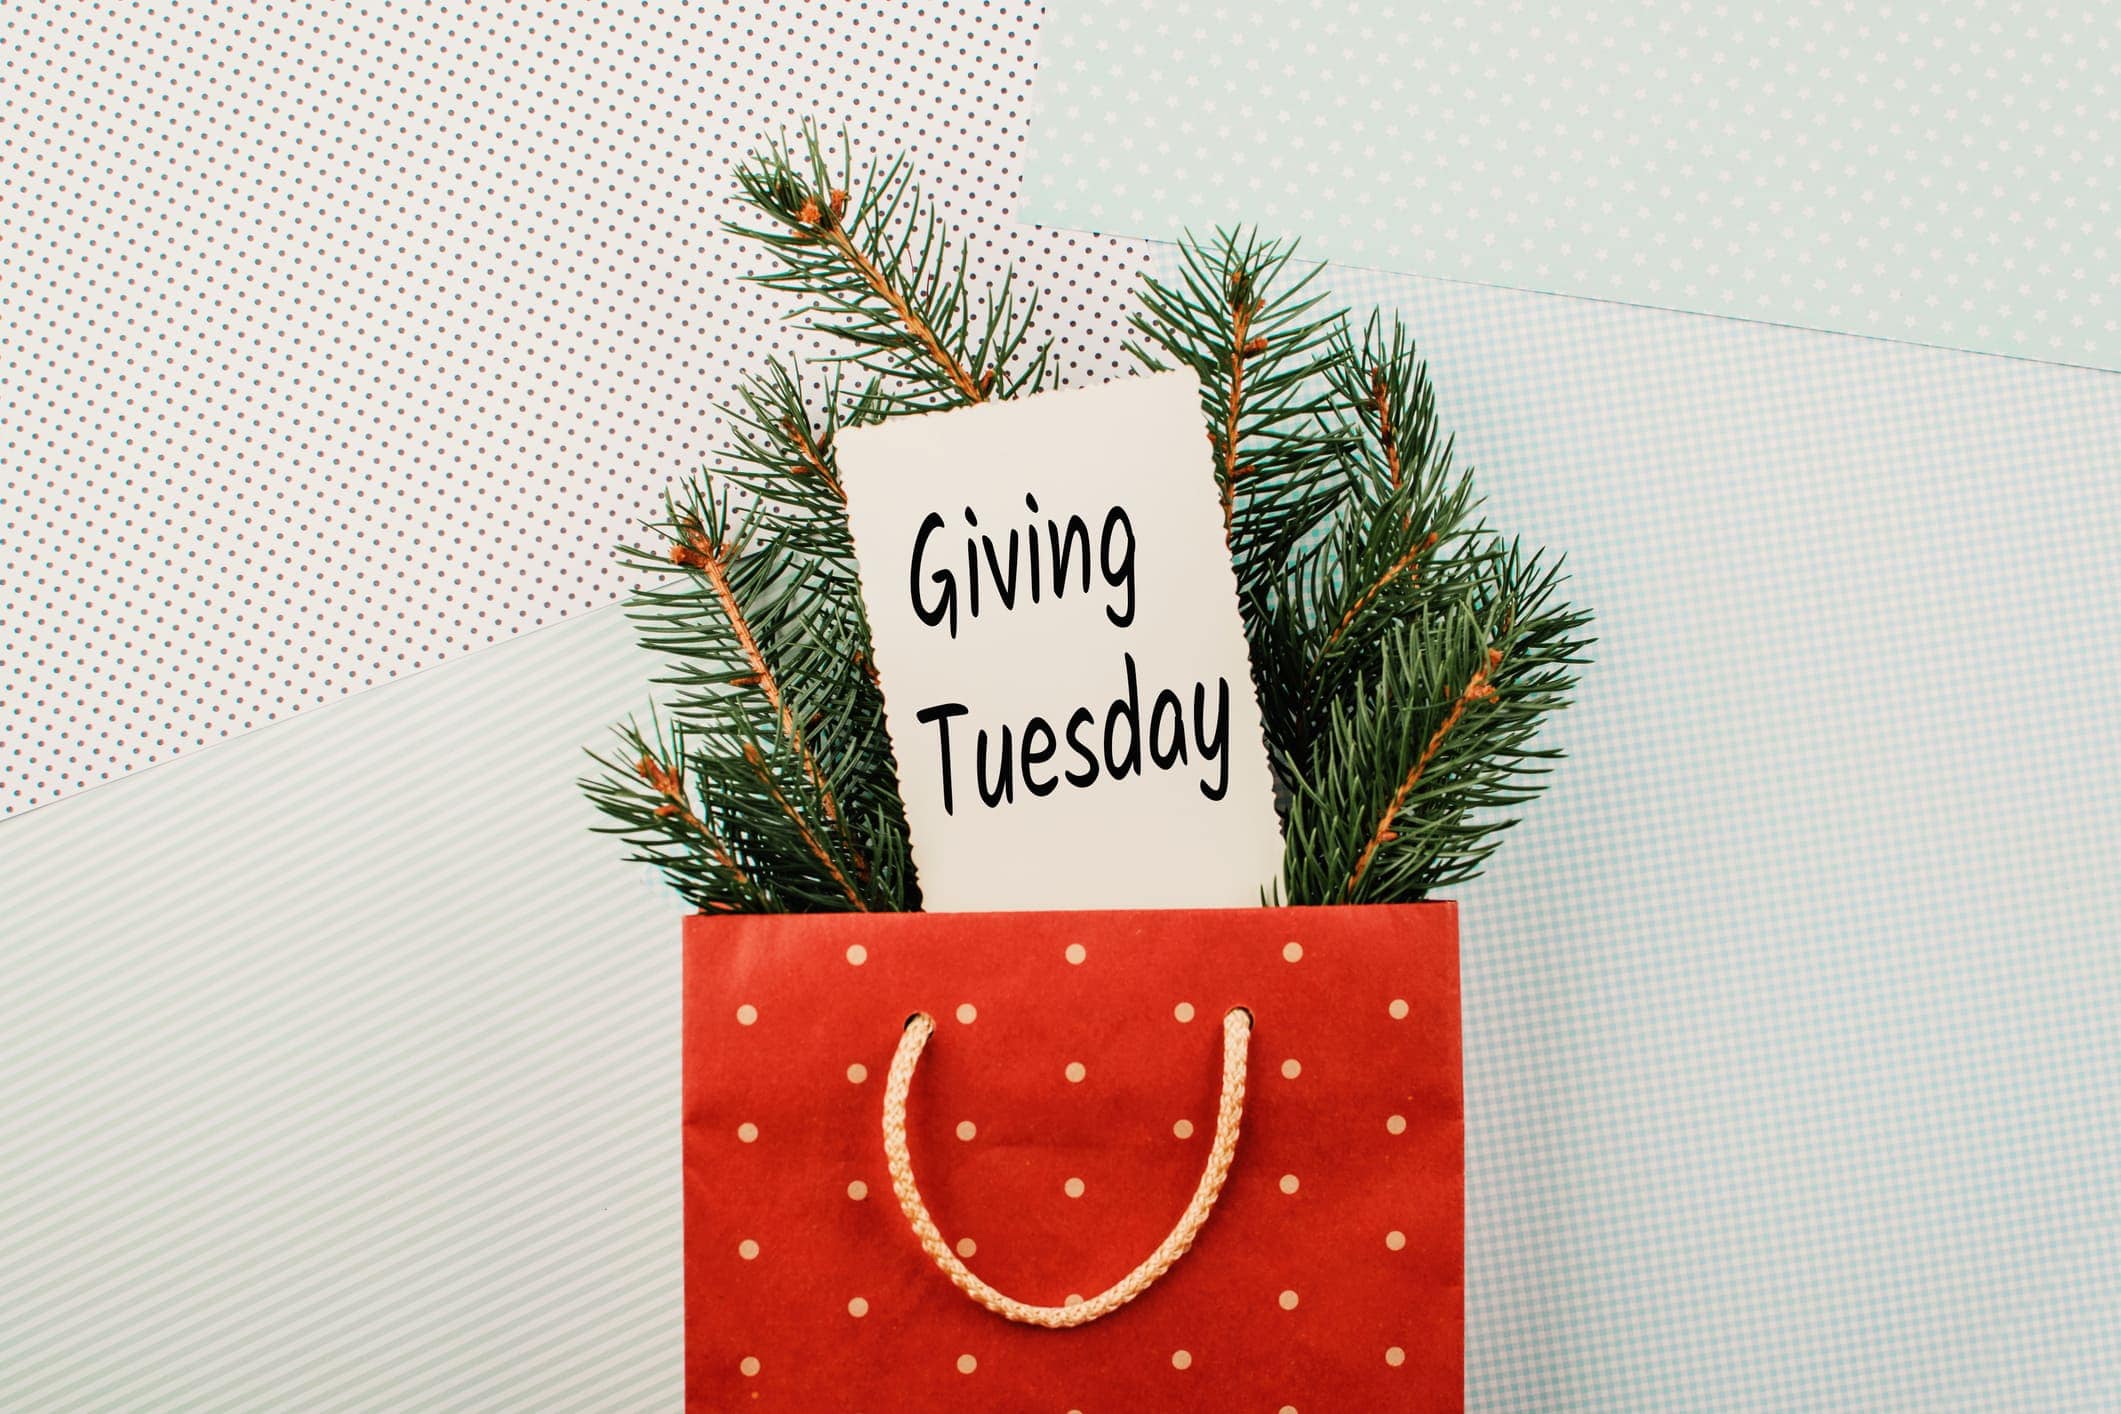 giving tuesday sign in gift bag